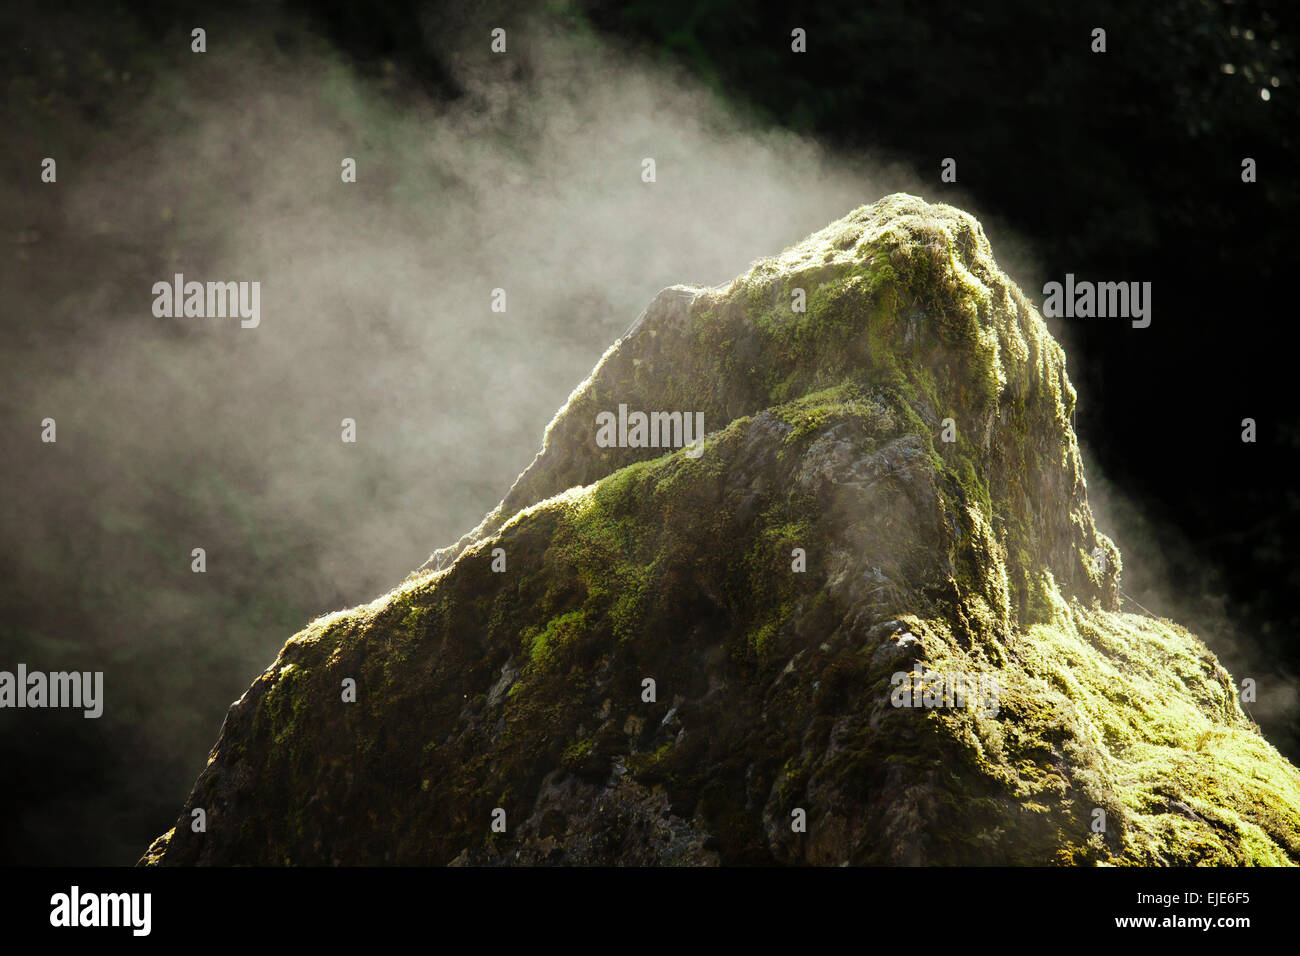 Sun causes evaporation and steam to come off a large boulder. Stock Photo